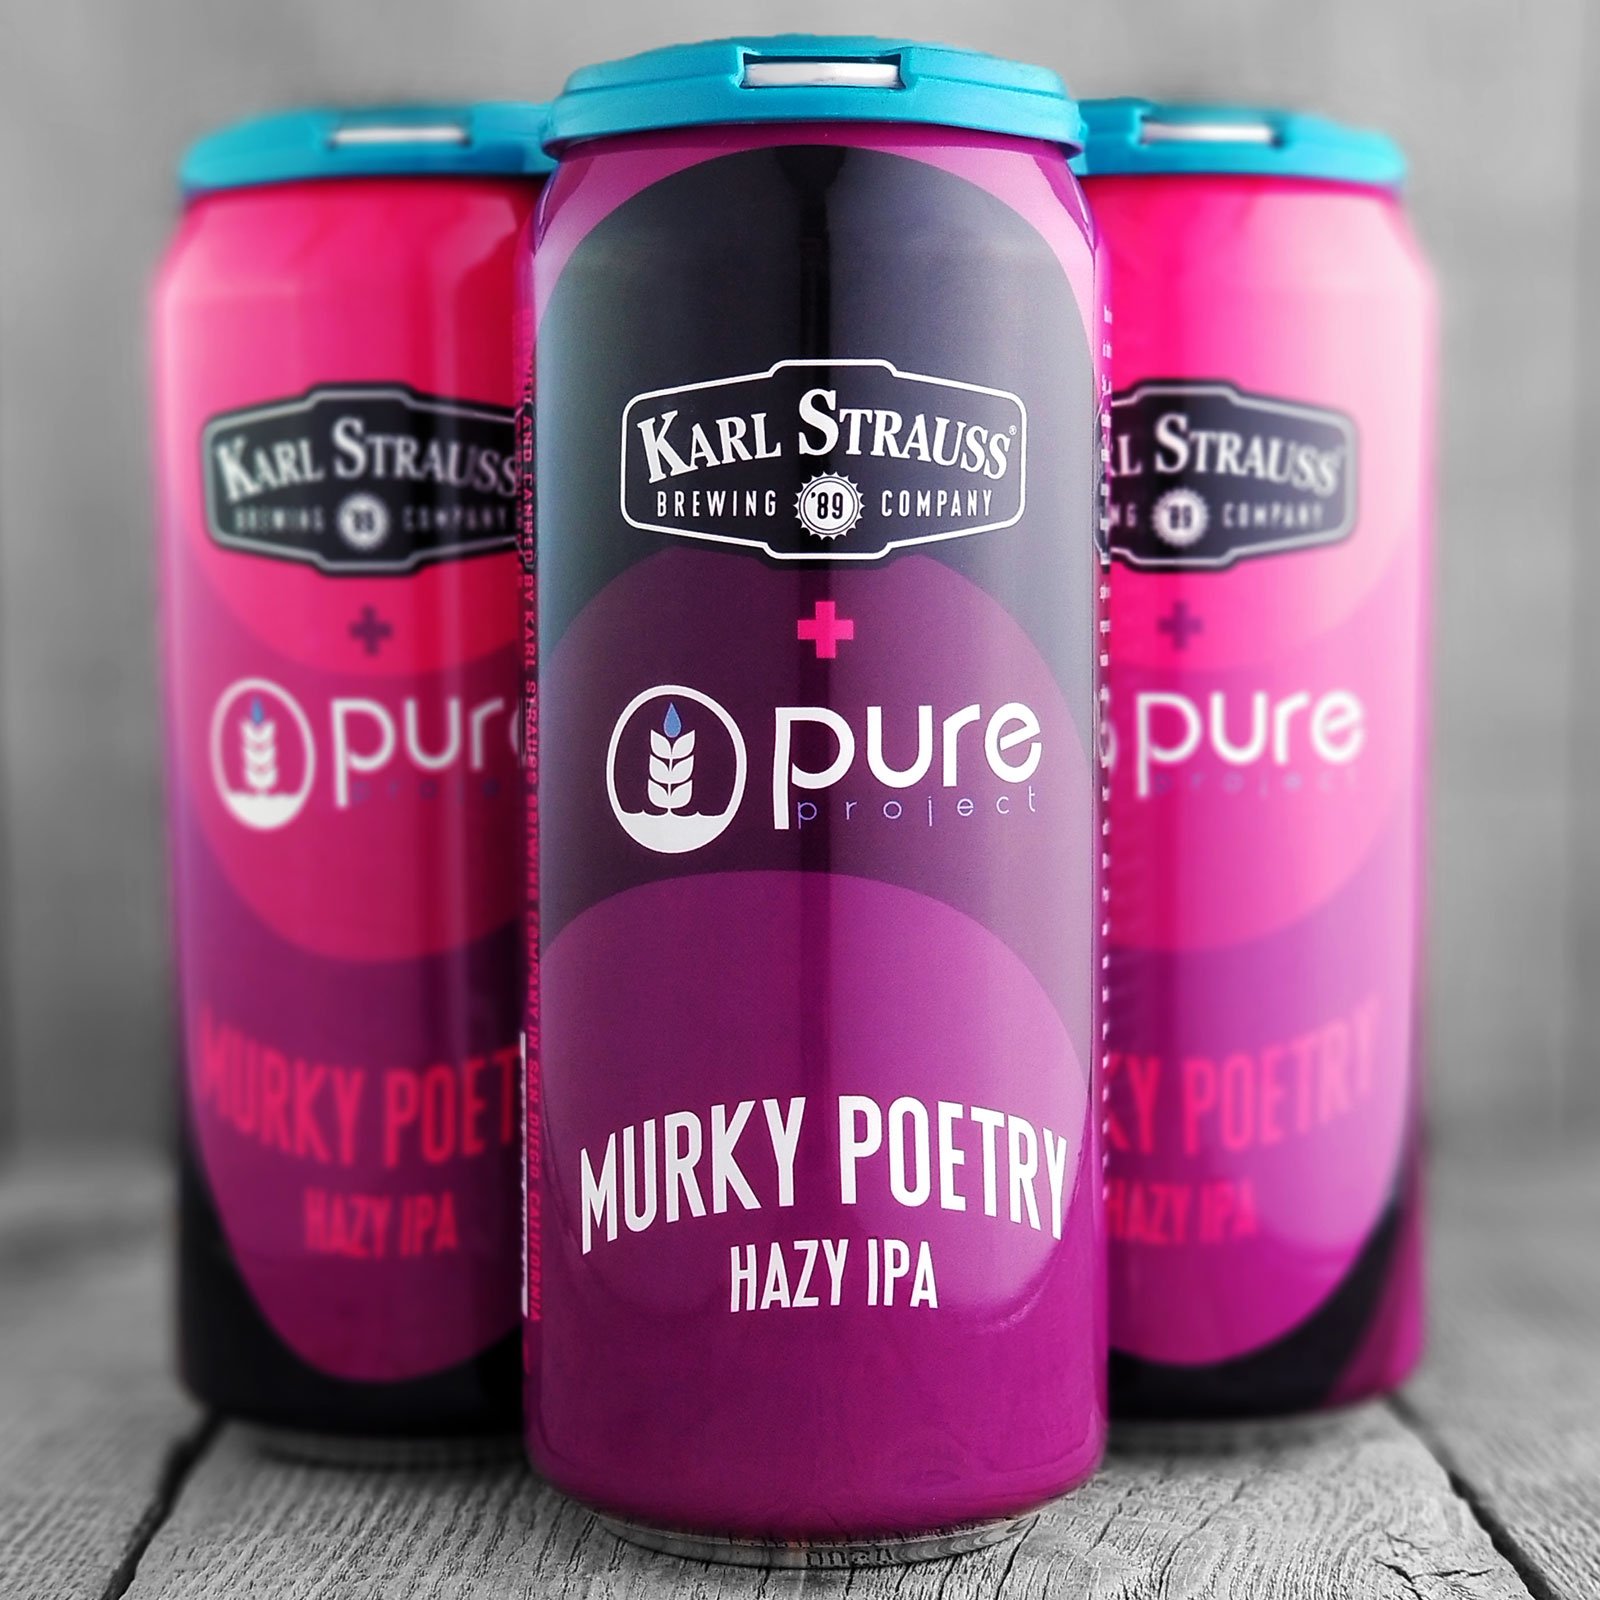 Pure Project + Karl Strauss Murky Poetry 